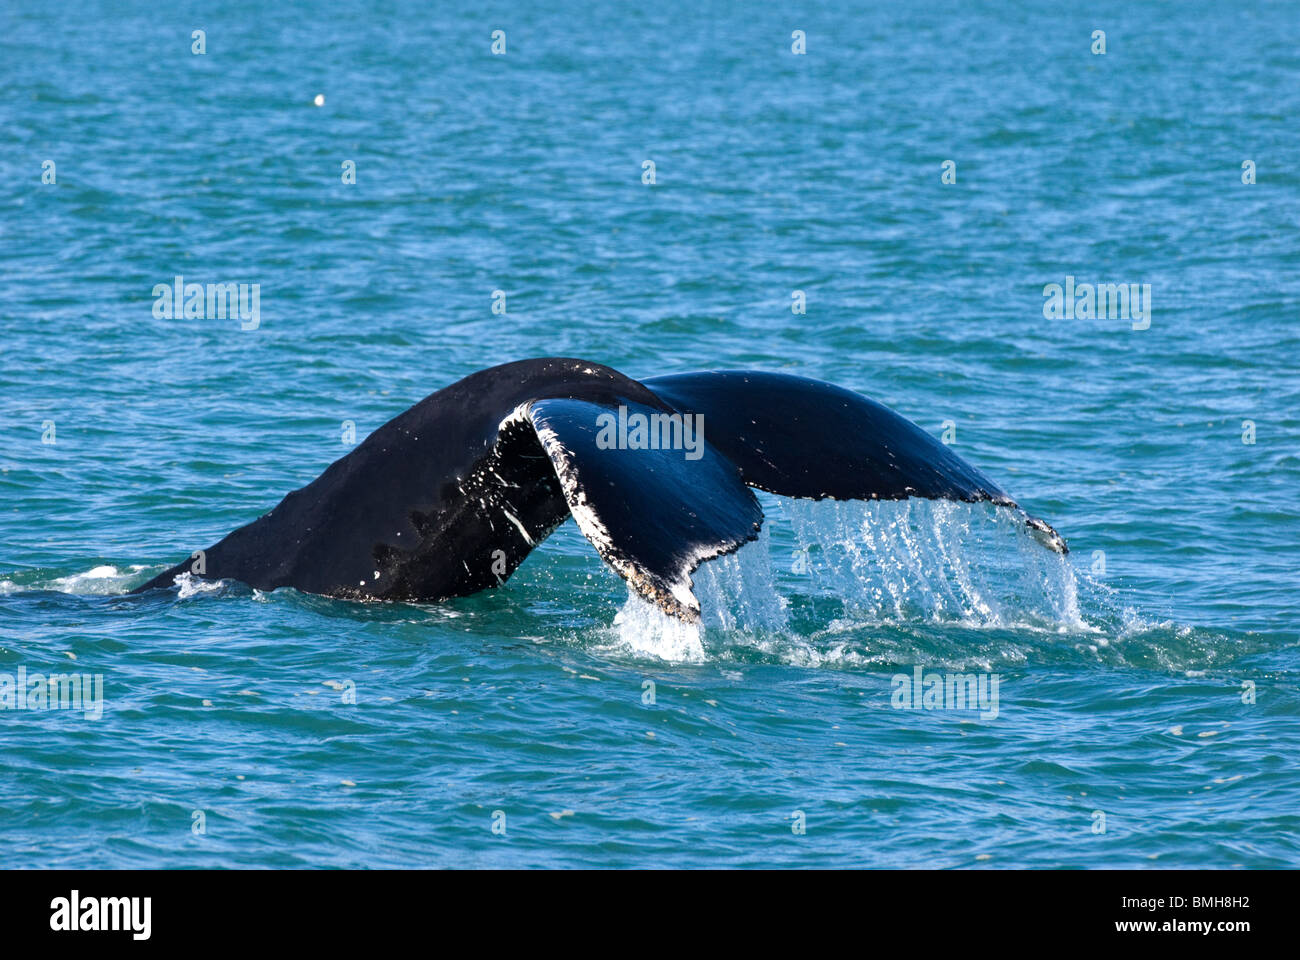 Humpback Whale diving showing flukes Stock Photo